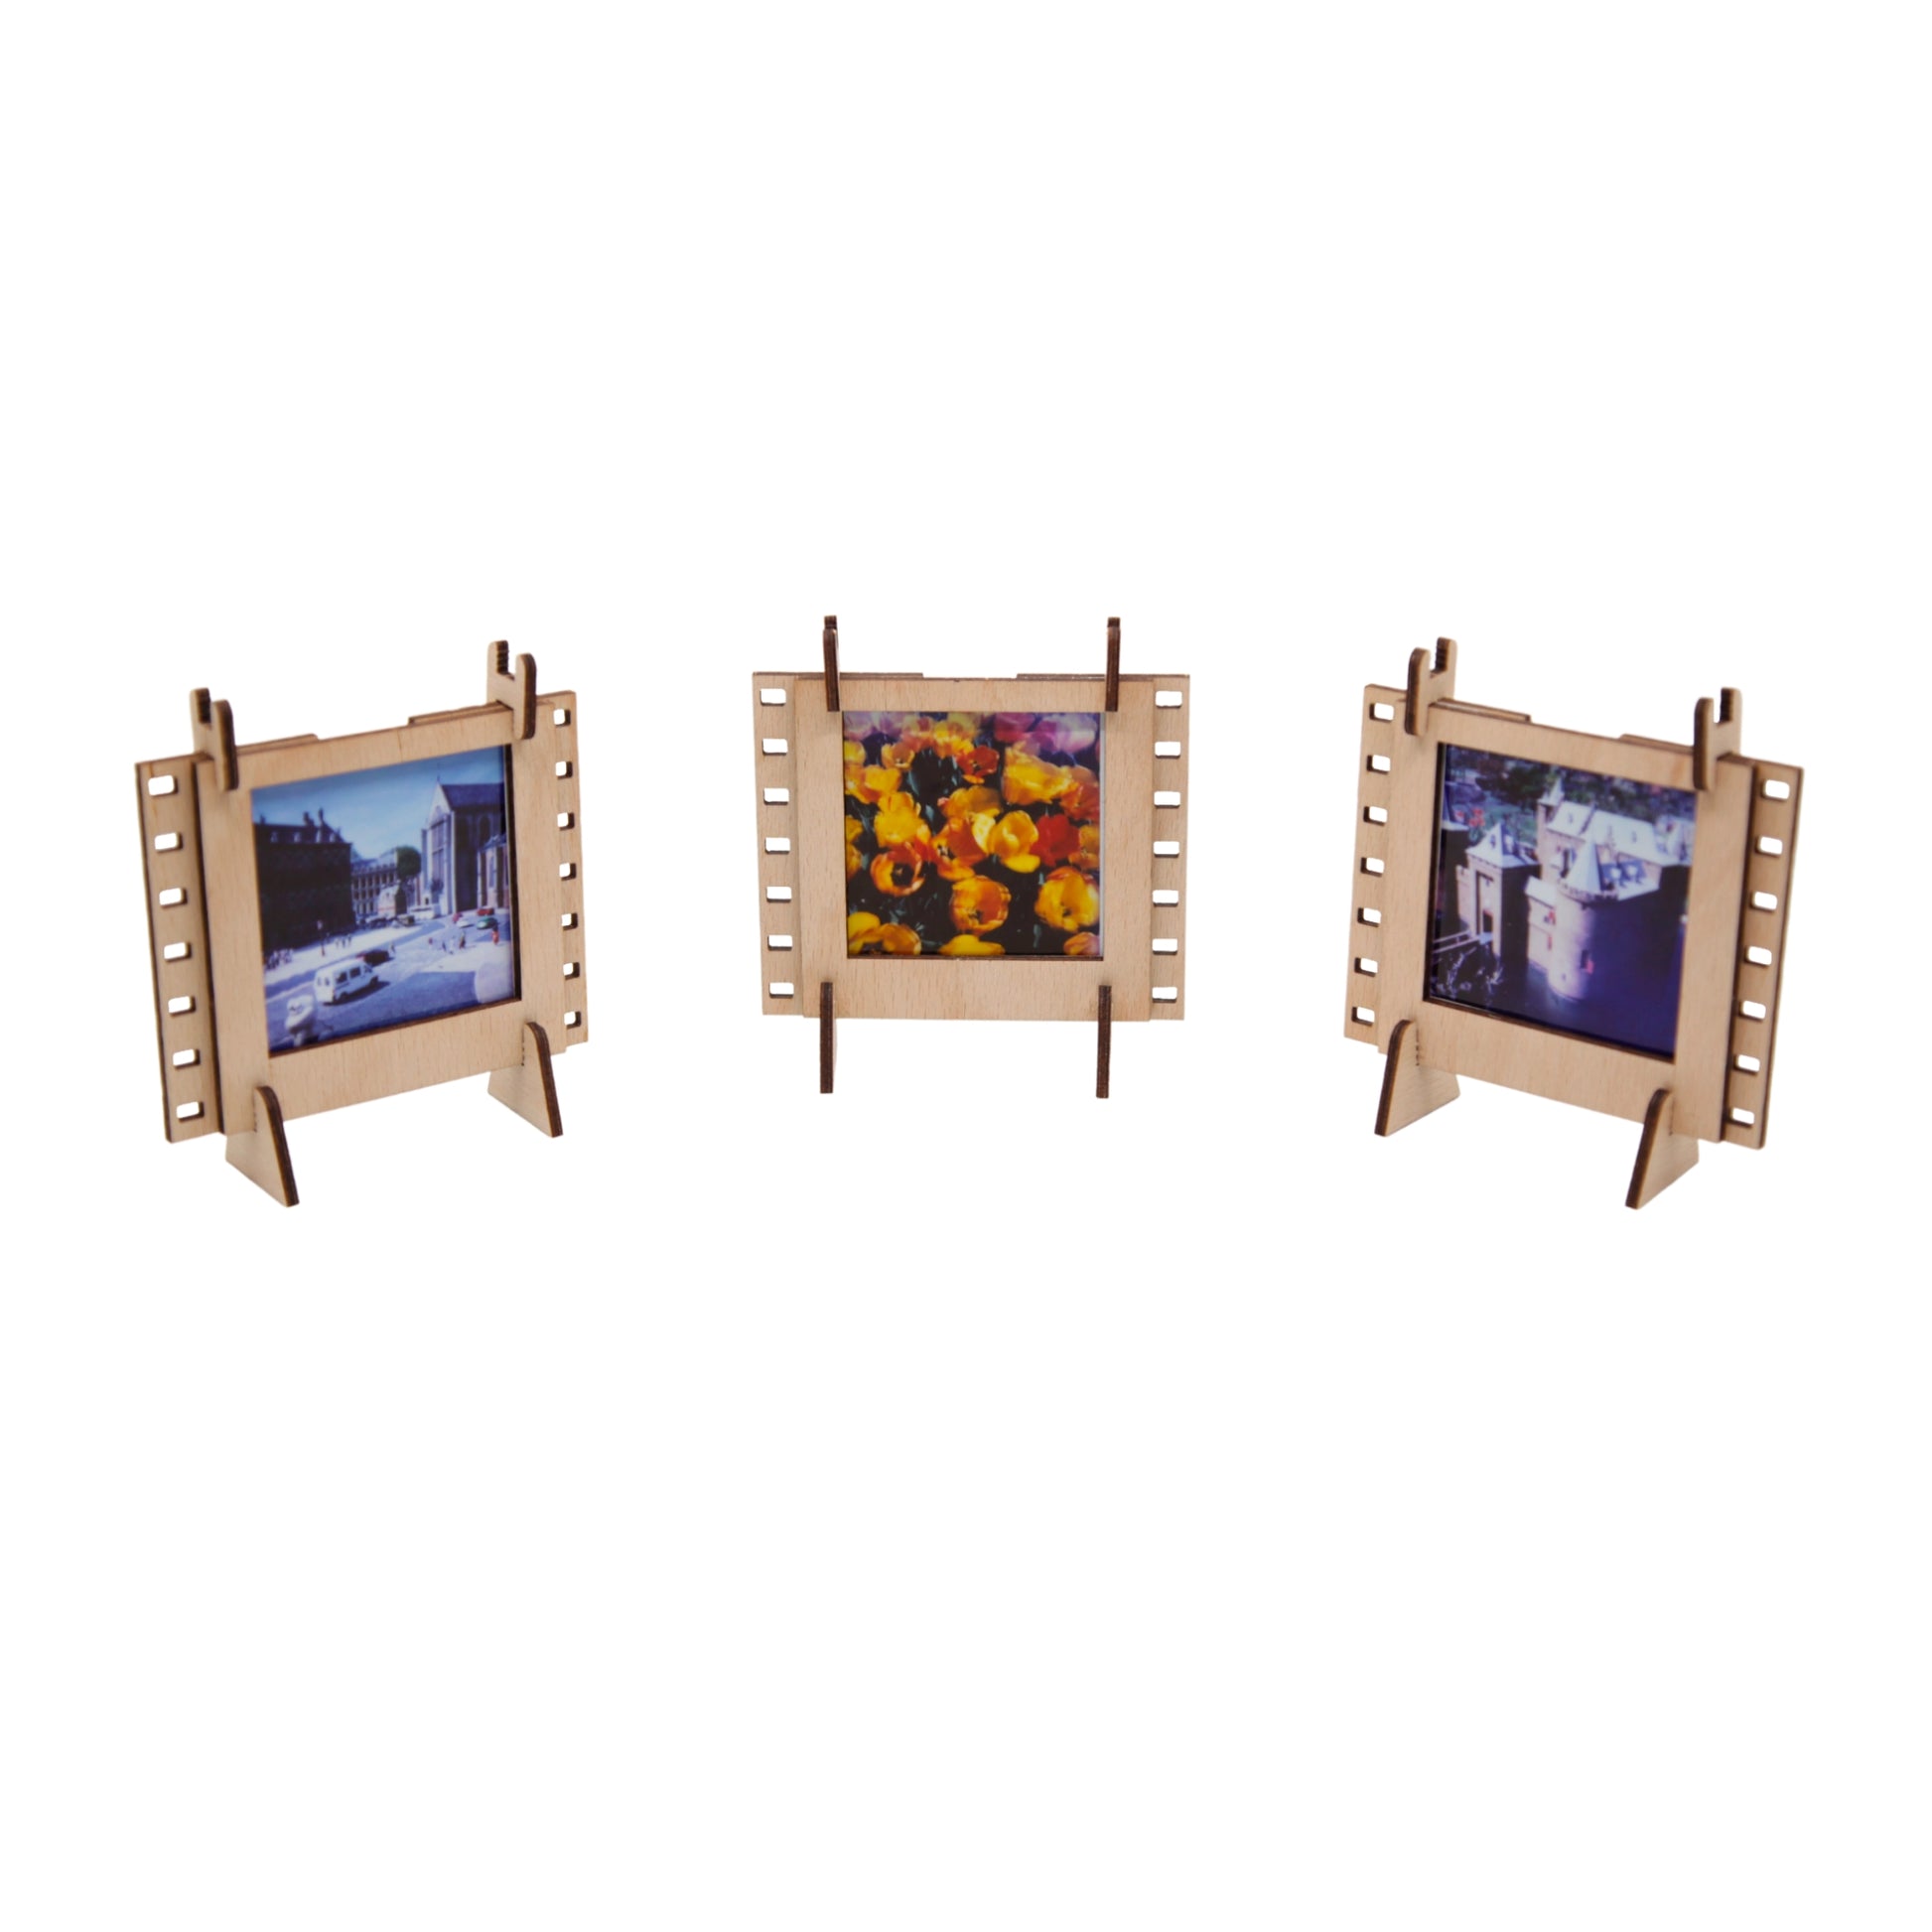 A set of three Natural plywood interconnectable Instax SQUARE film photo frames for instant SQUARE photos.